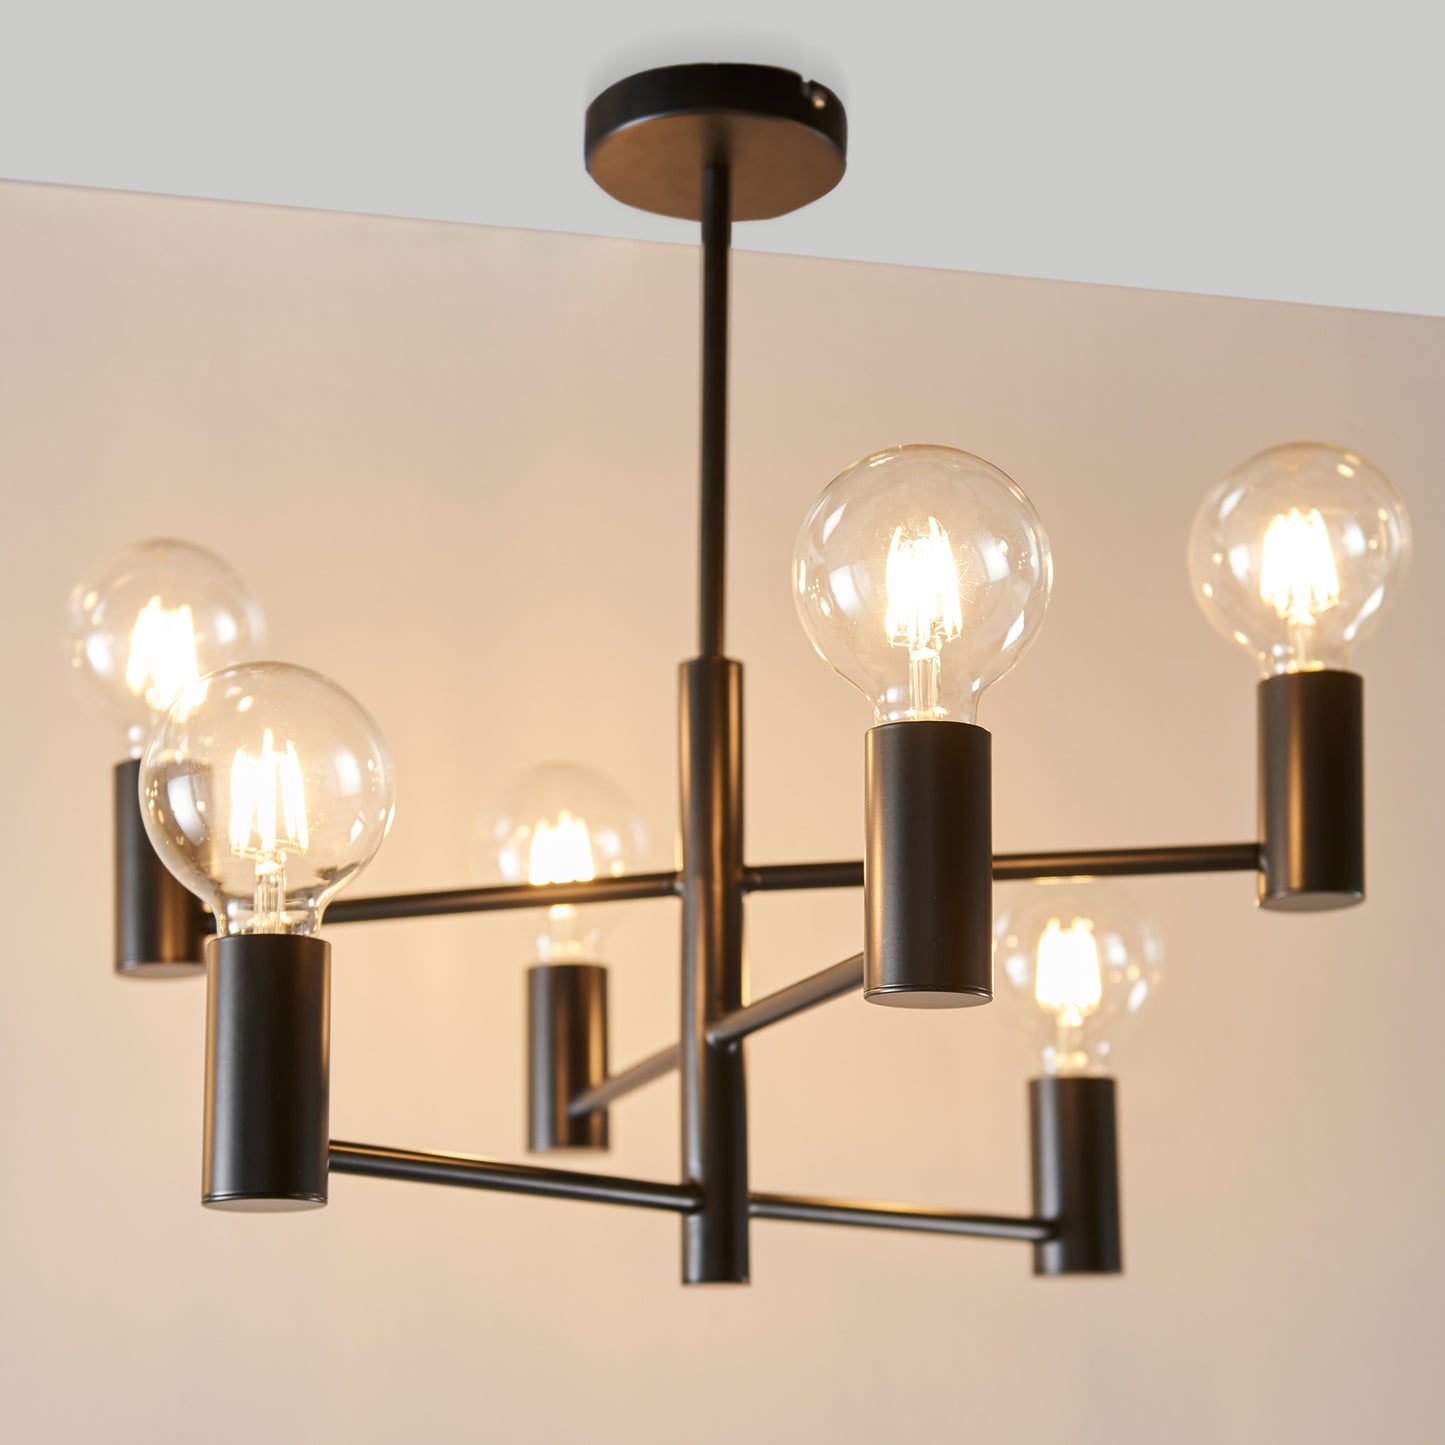 A Studio 6 Ceiling Light 553mm with five light bulbs for interior decor.